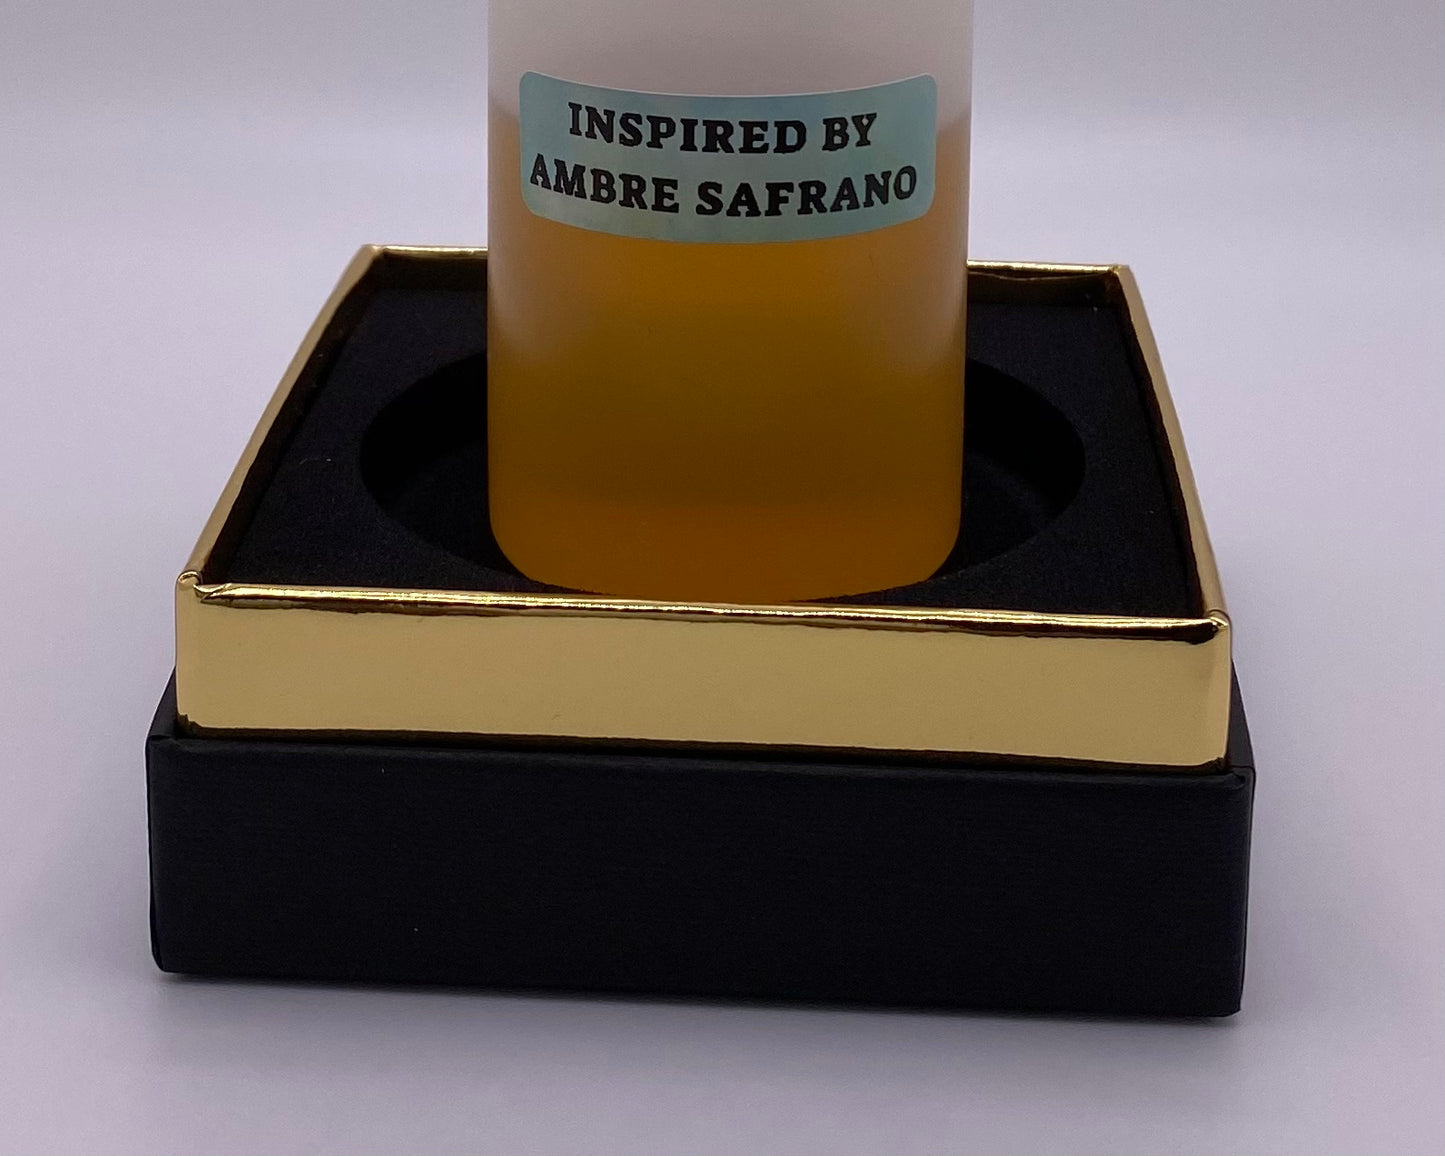 Inspired by Amber Safrano Eau De Parfum from BDK